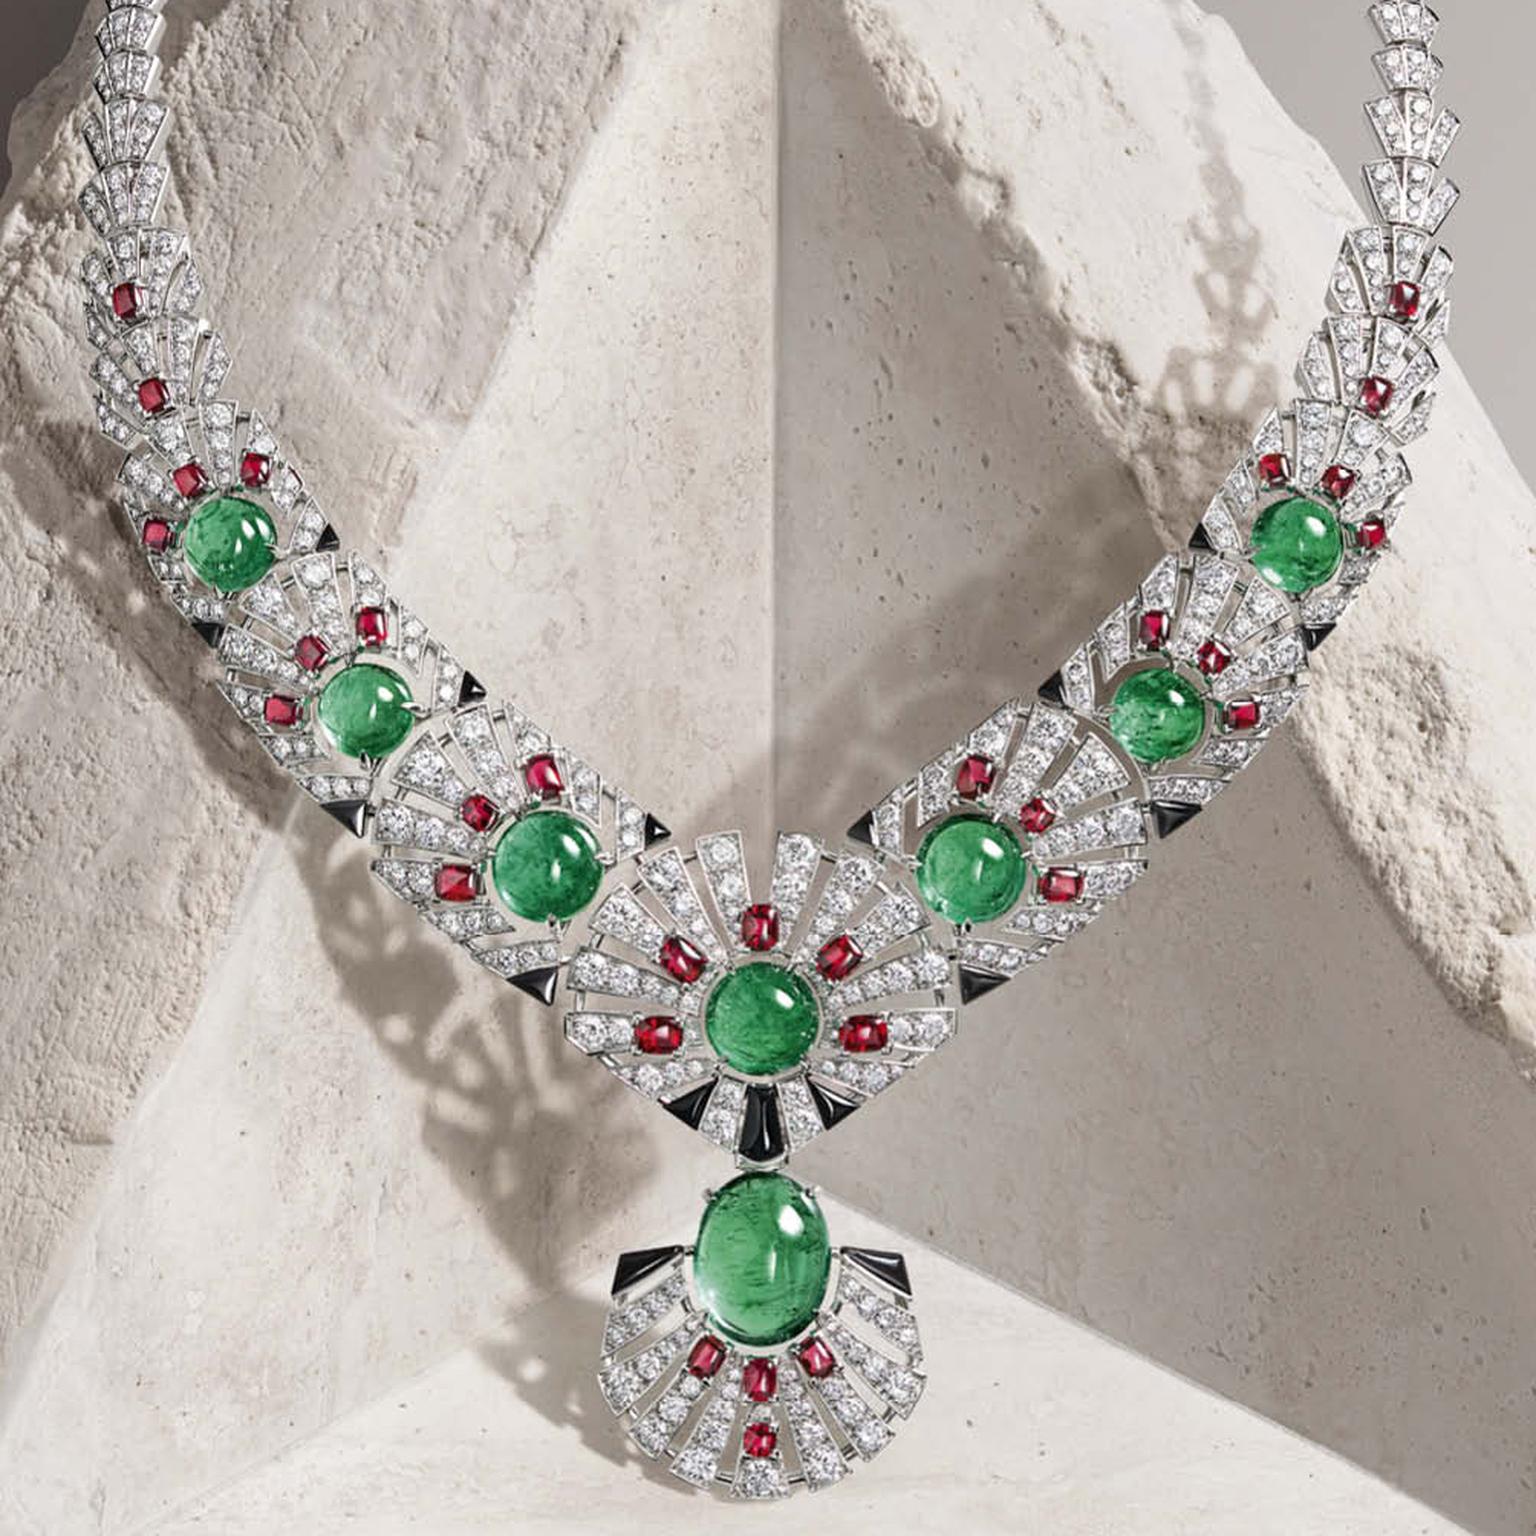 Louis Vuitton Celebrated Women in Their Latest High Jewellery Collection